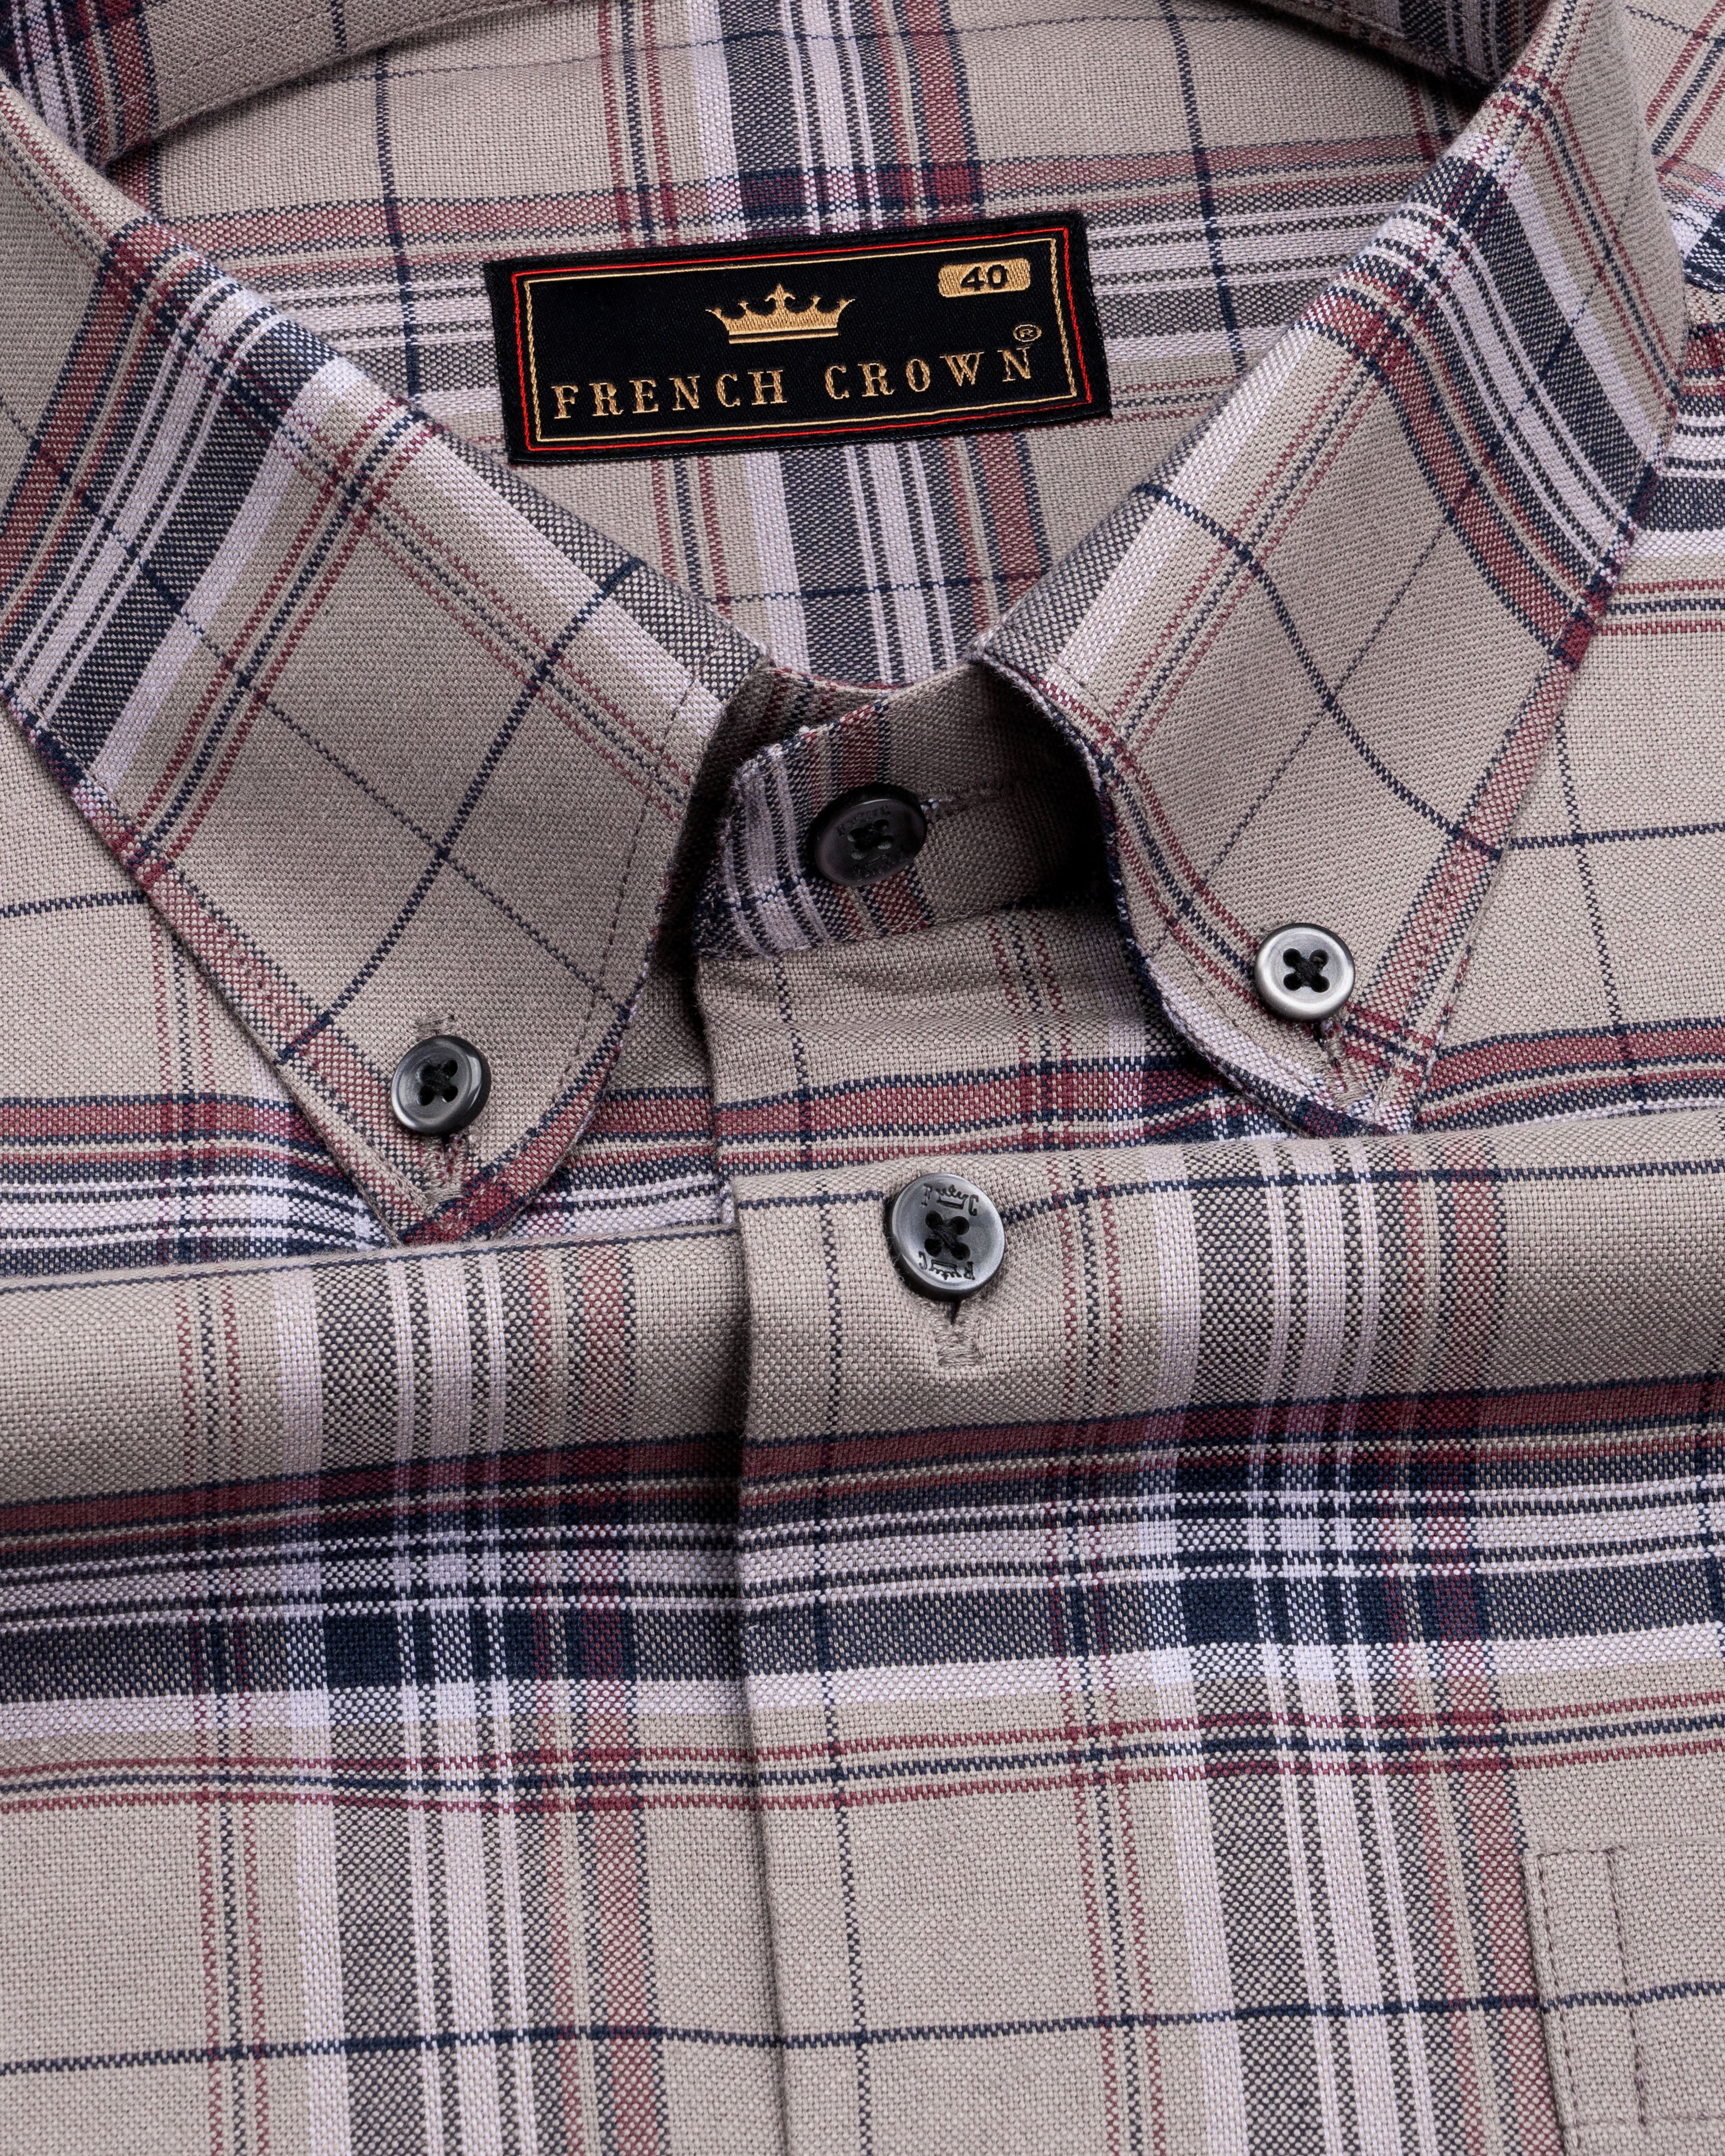 Martini Brown with Mauve Maroon and Mirage Blue Plaid Royal Oxford Shirt 9568-BD-BLK-38, 9568-BD-BLK-H-38, 9568-BD-BLK-39, 9568-BD-BLK-H-39, 9568-BD-BLK-40, 9568-BD-BLK-H-40, 9568-BD-BLK-42, 9568-BD-BLK-H-42, 9568-BD-BLK-44, 9568-BD-BLK-H-44, 9568-BD-BLK-46, 9568-BD-BLK-H-46, 9568-BD-BLK-48, 9568-BD-BLK-H-48, 9568-BD-BLK-50, 9568-BD-BLK-H-50, 9568-BD-BLK-52, 9568-BD-BLK-H-52